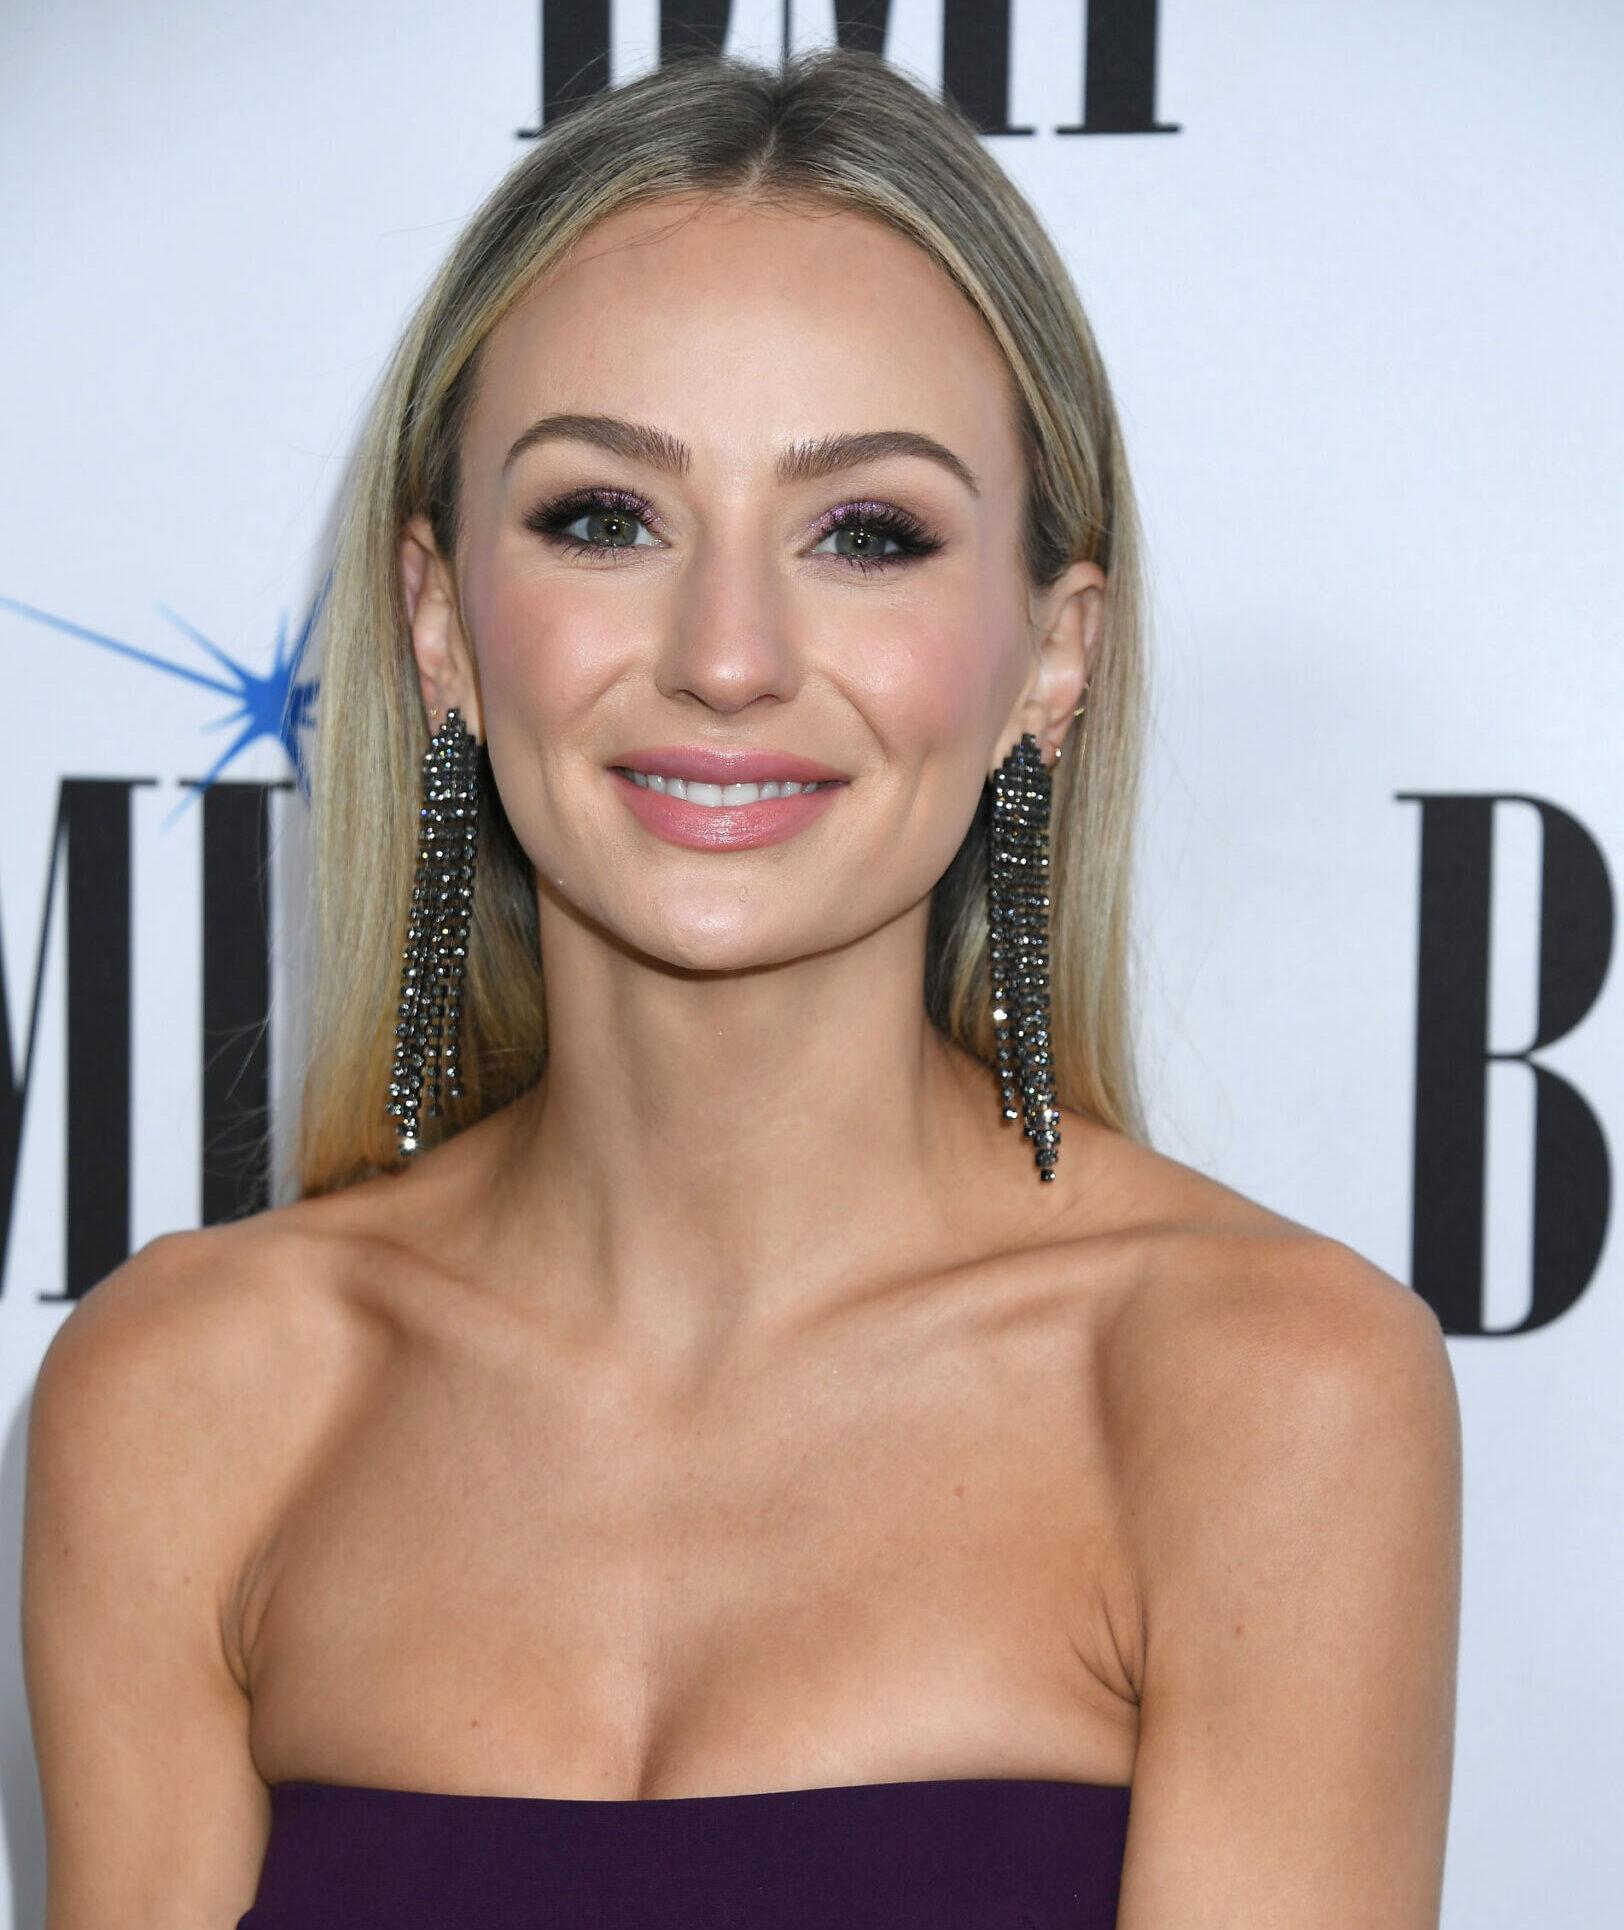 Lauren Bushnell at the 2019 BMI Country Awards held at BMI Music Row Headquarters.